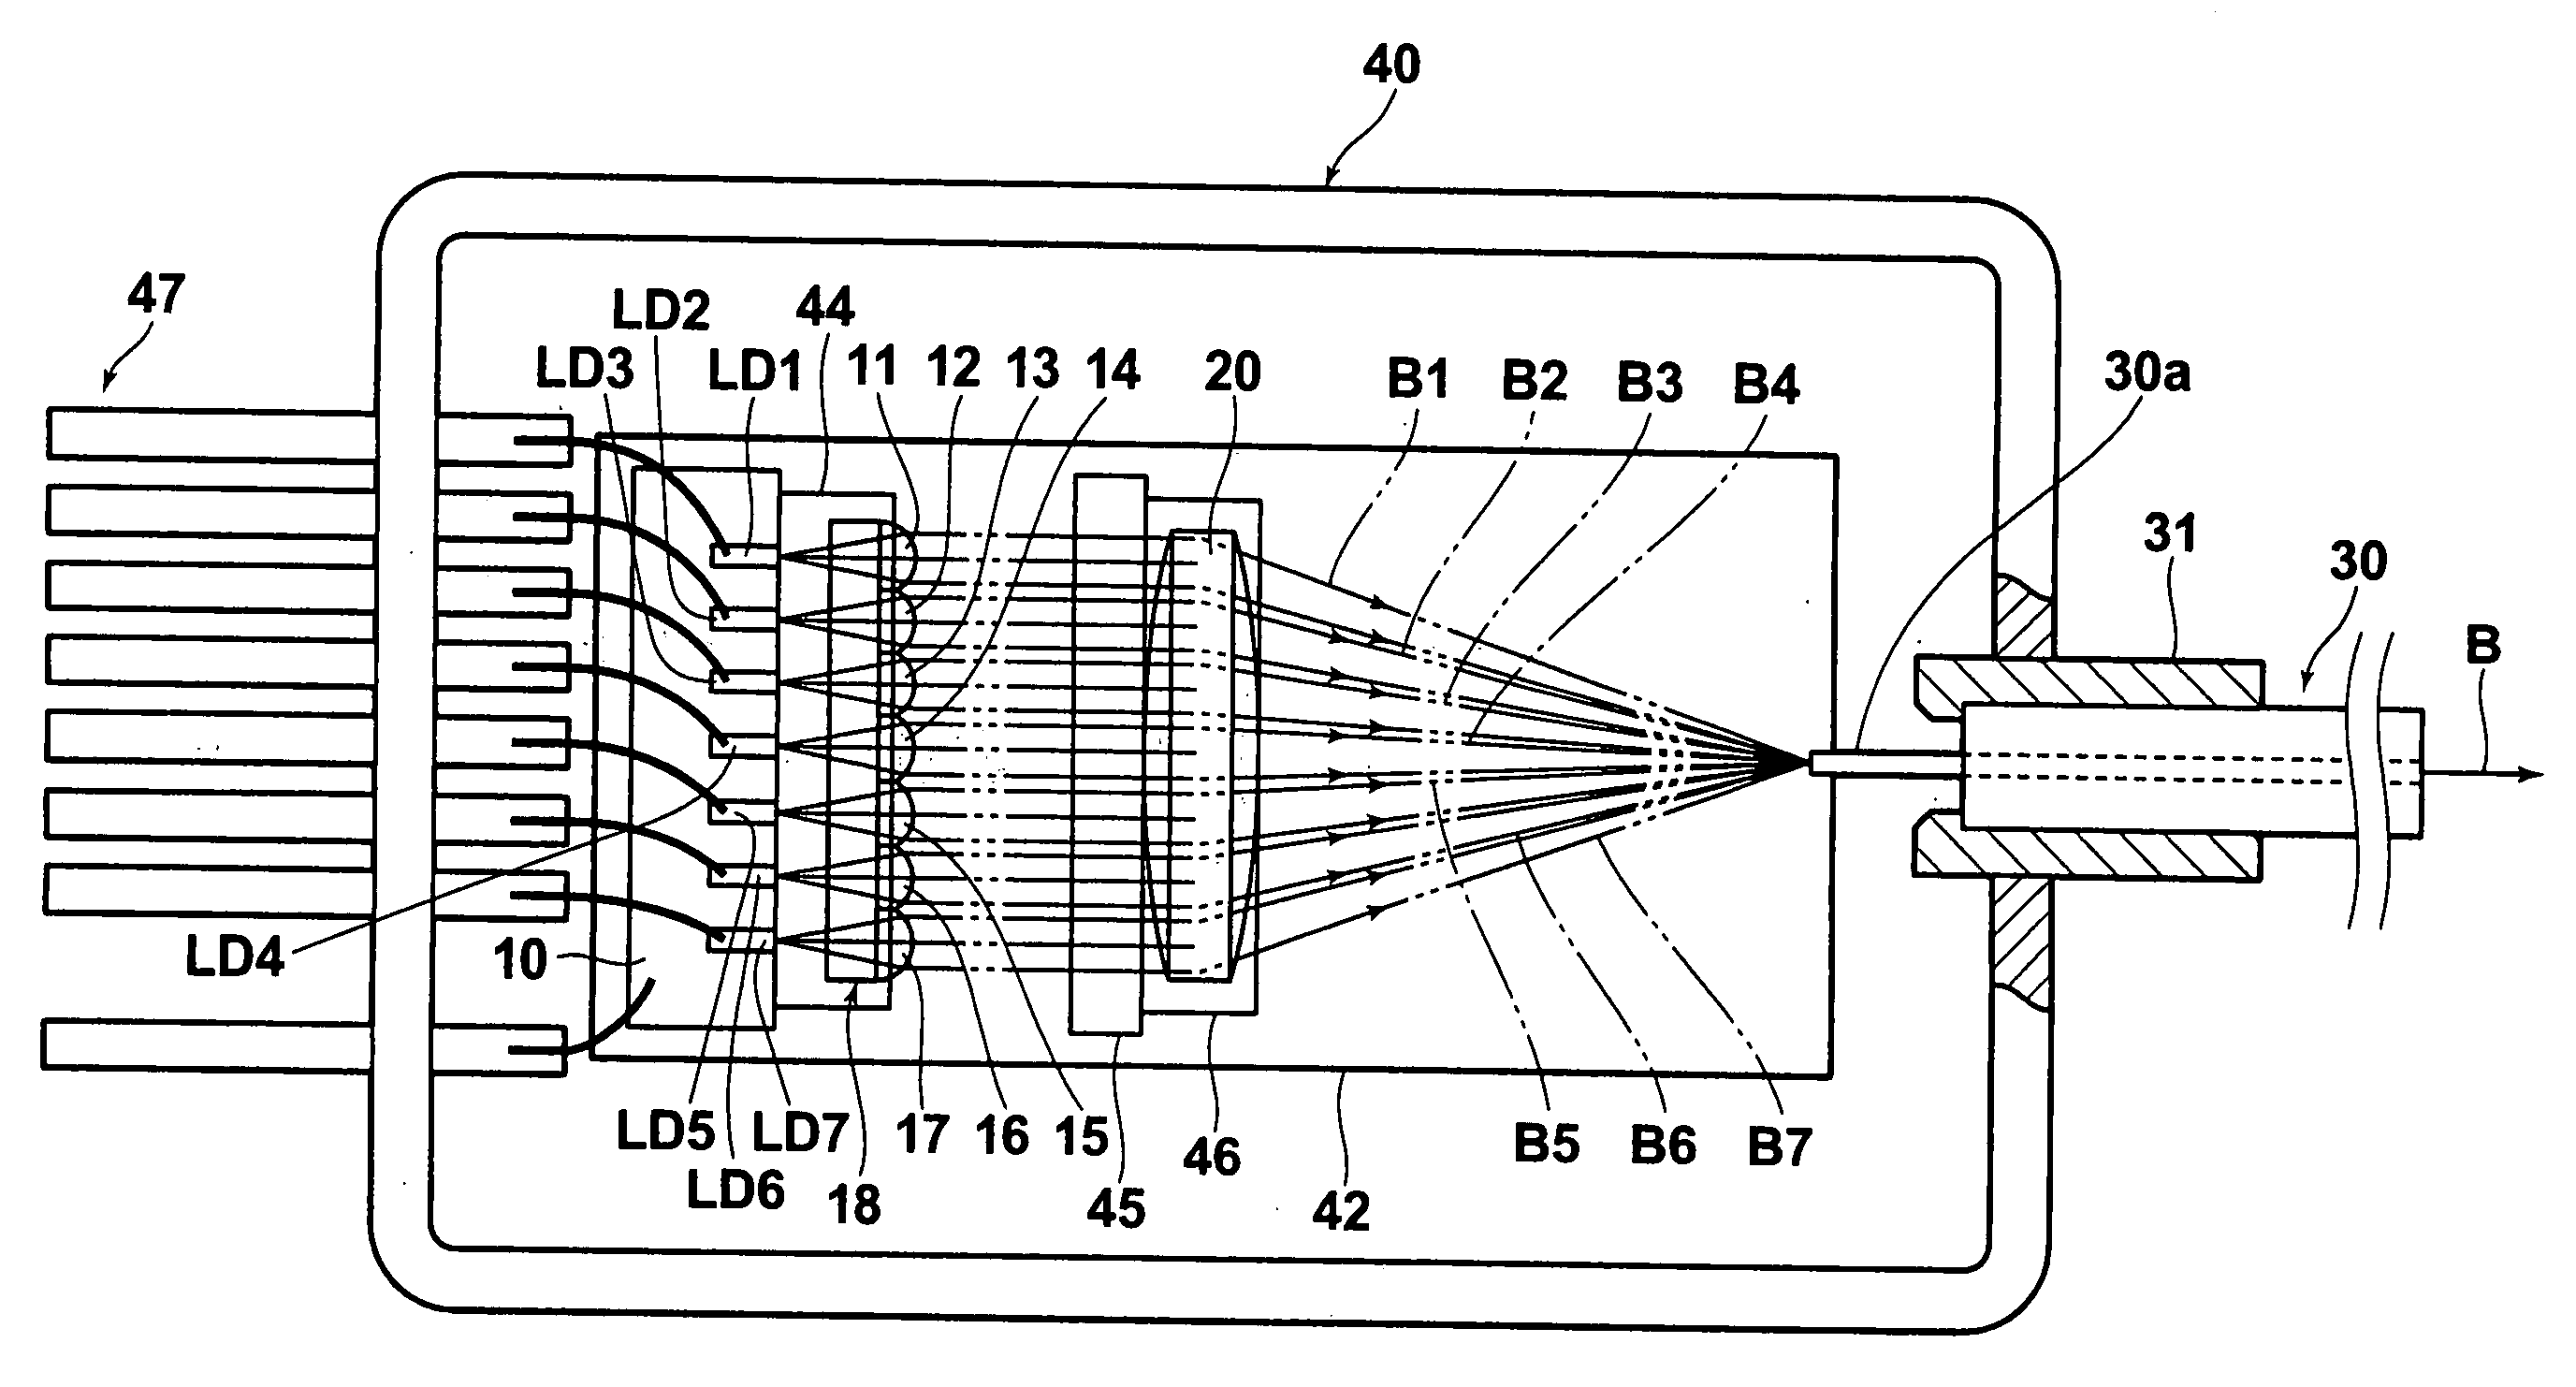 Laser apparatus and method for assembling the same